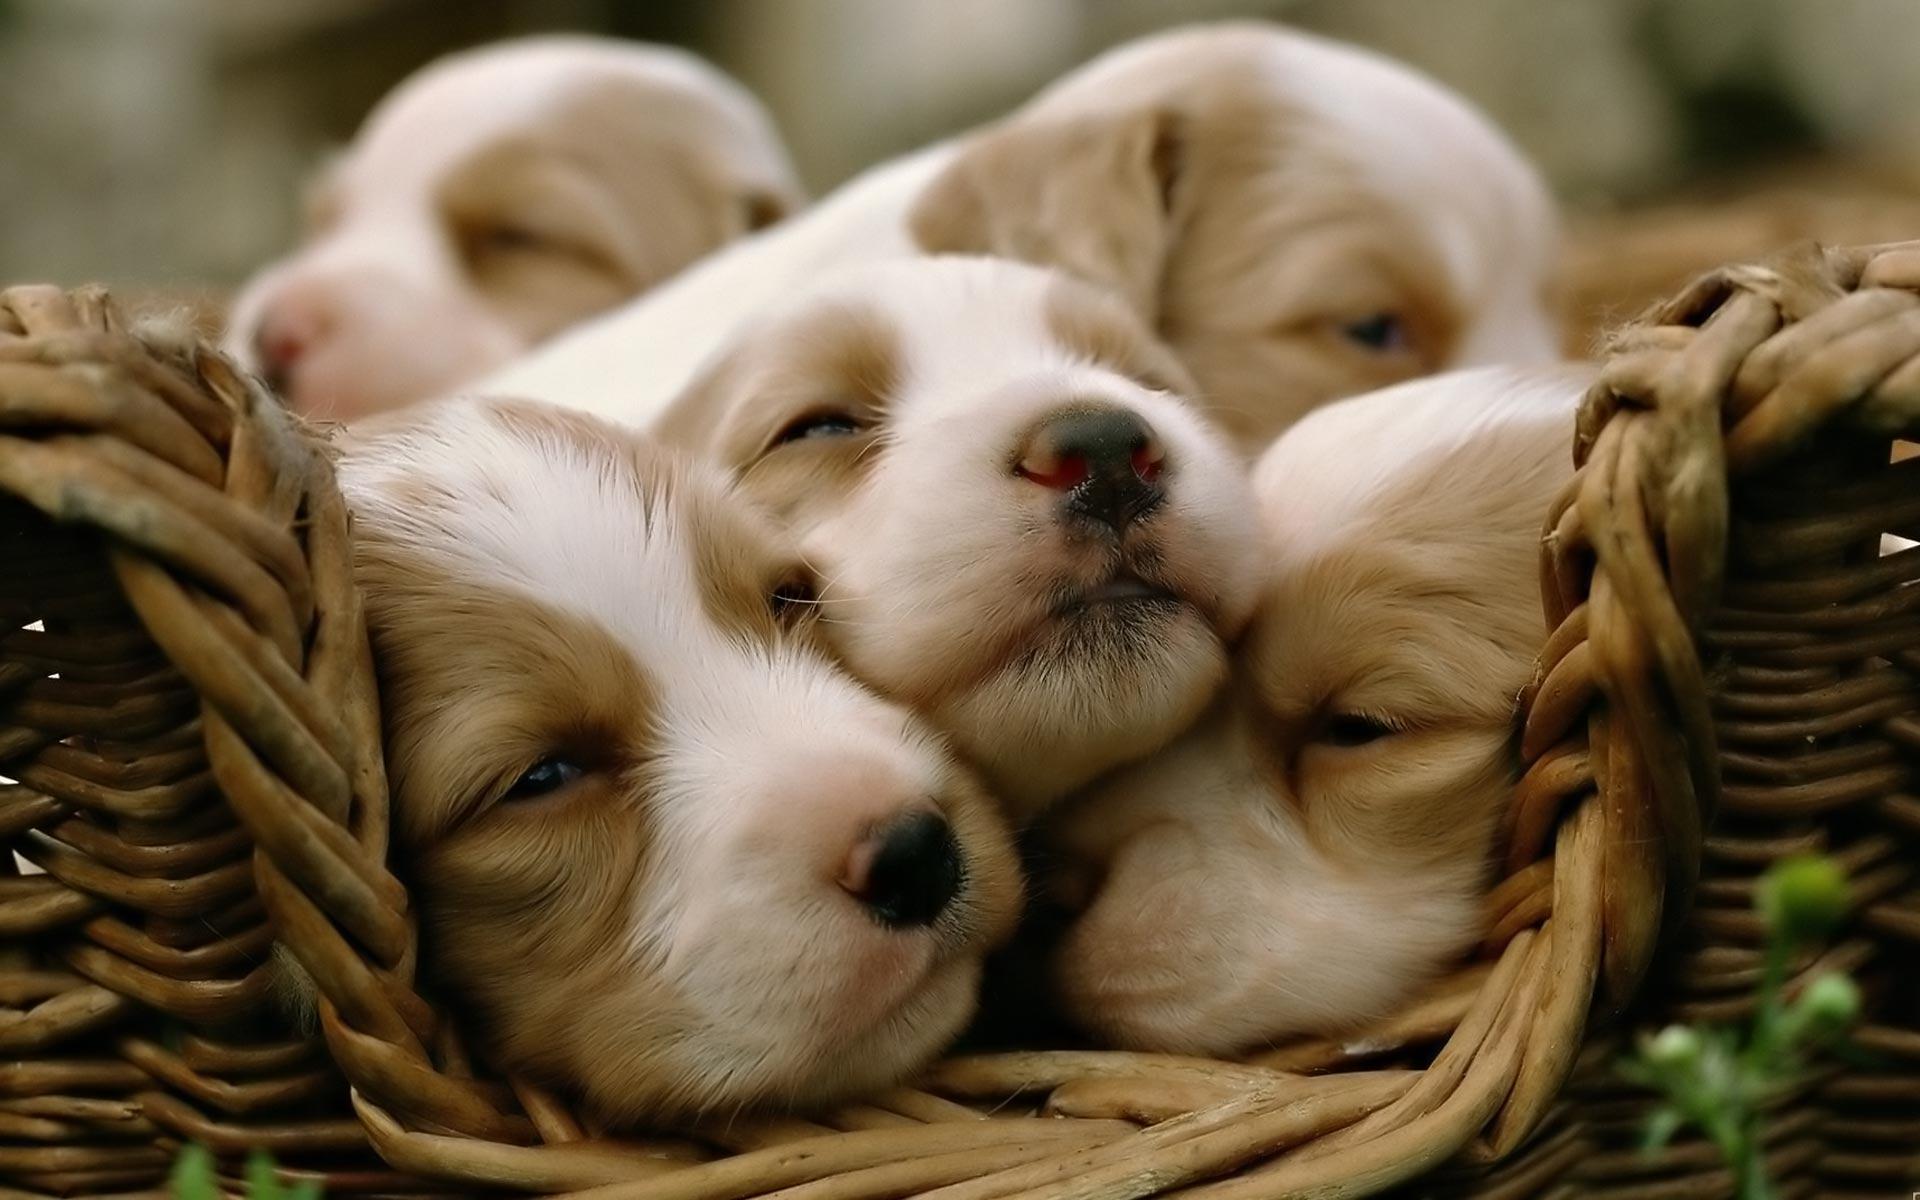 Desktop background // Animal Life // Dogs. Puppy dogs // Cute